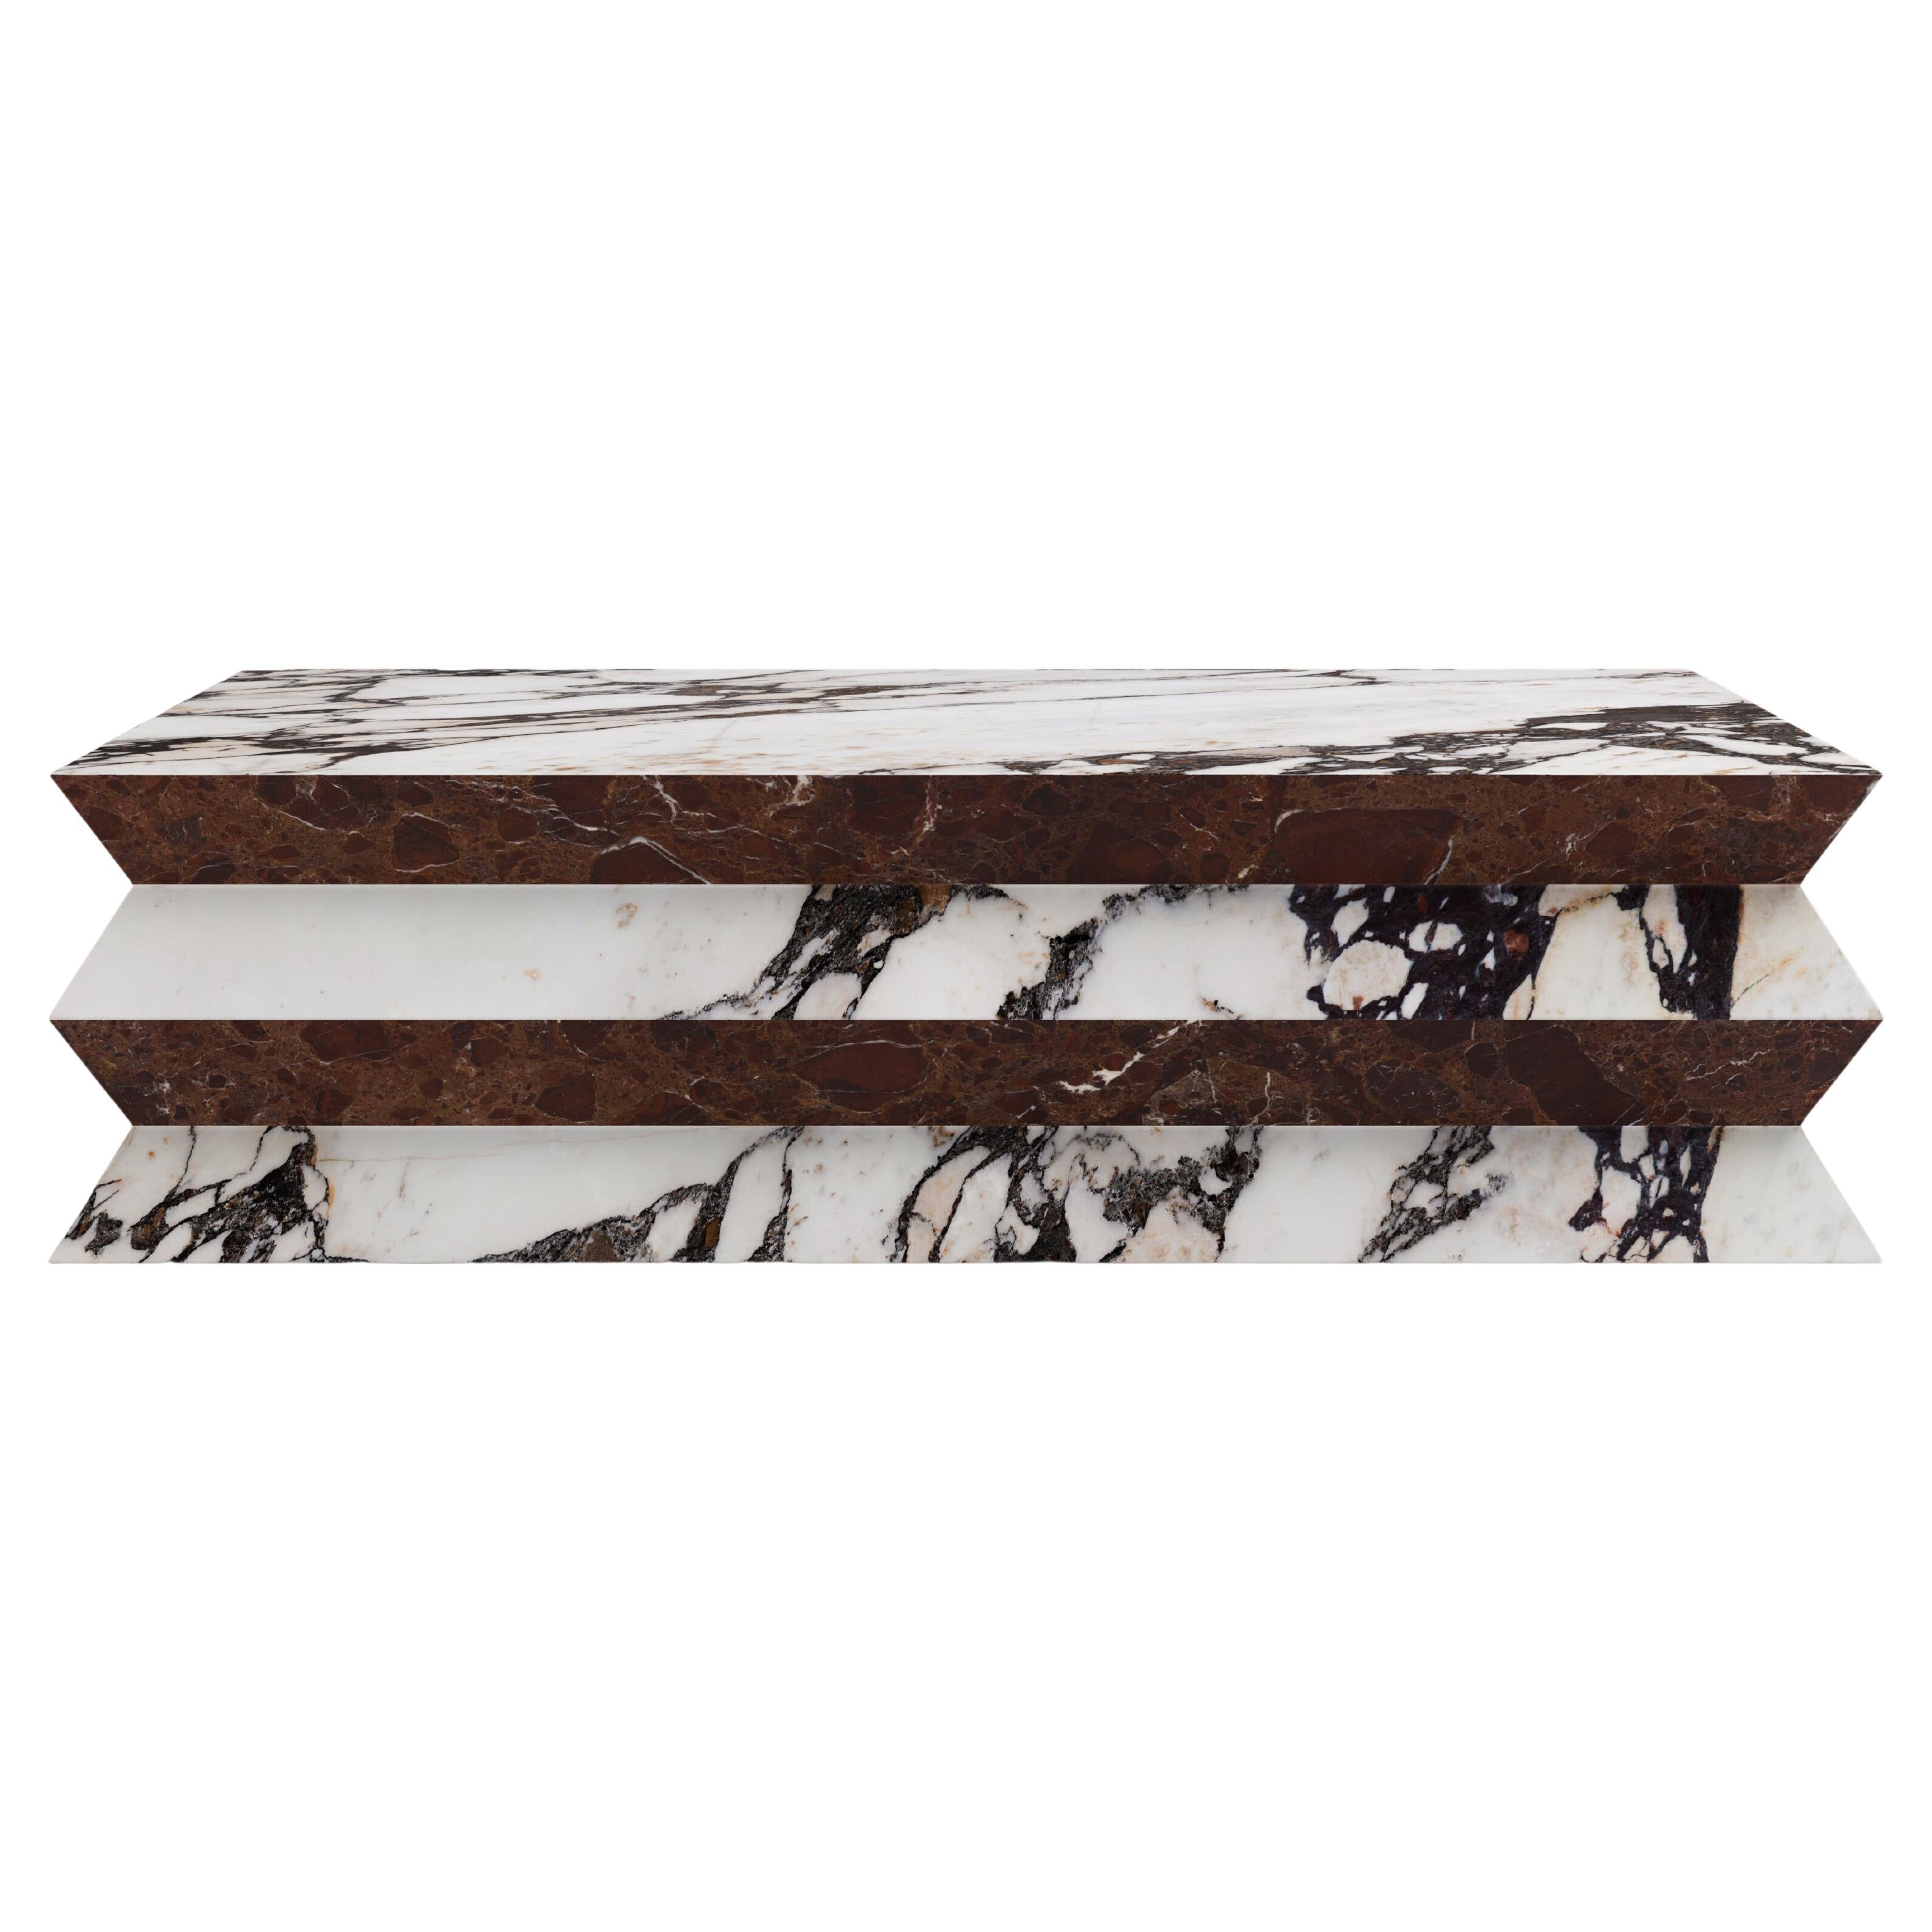 FORM(LA) Grinza Rectangle Coffee Table 60"L x 36"W x 16"H Calacatta Viola Marble For Sale